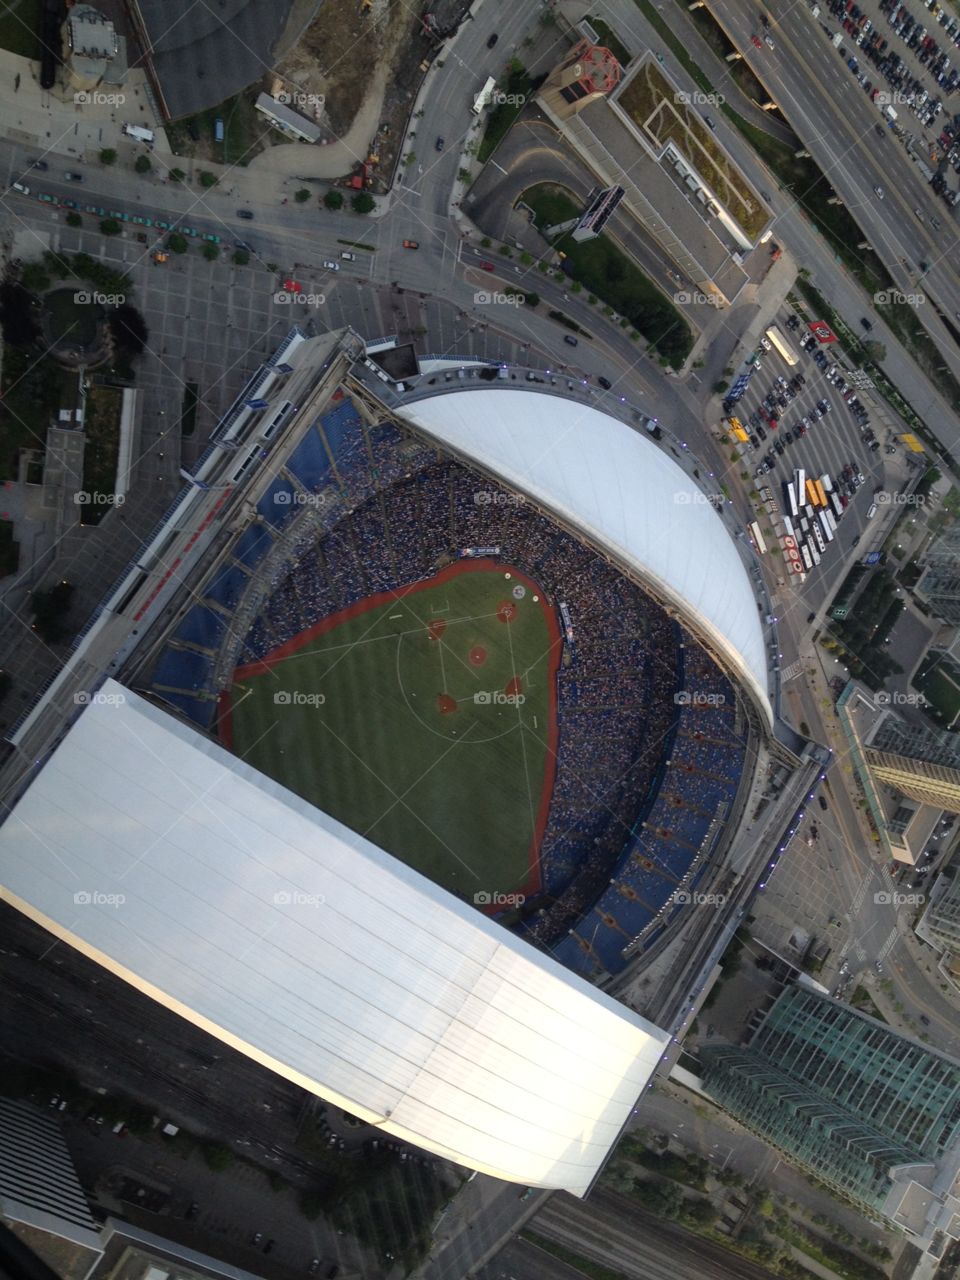 View of the Rogers Center from the CN Tower